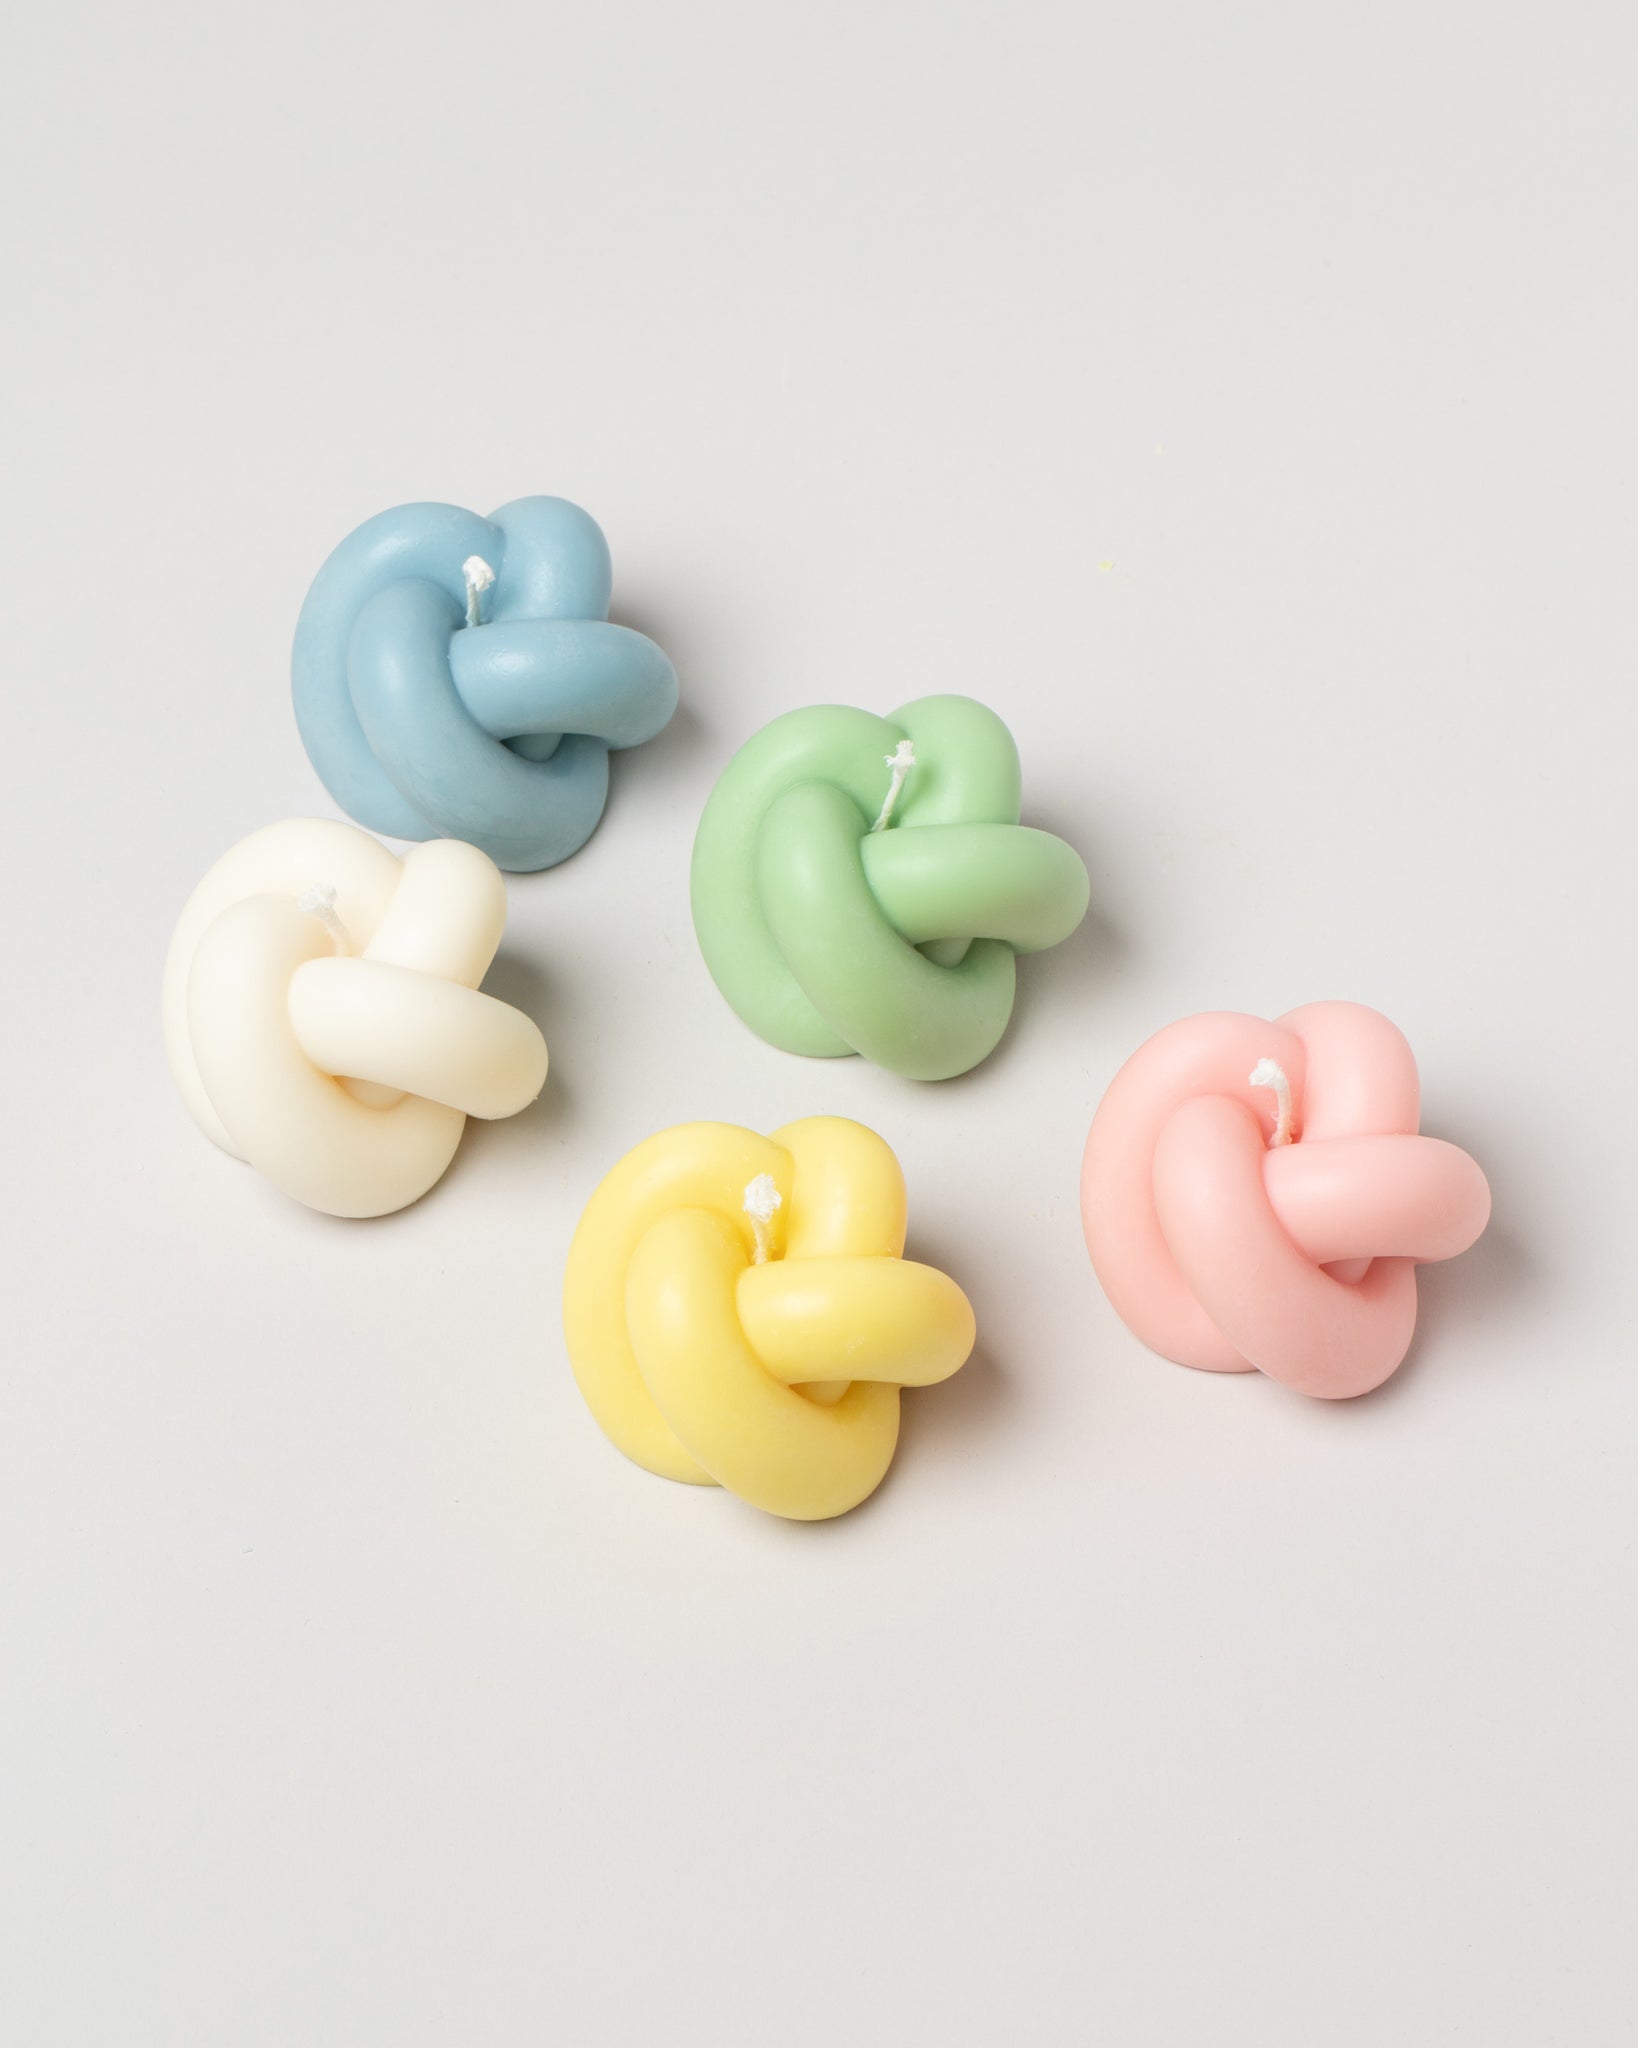 Special Interest Goods Collection Knot Candles in various pastels, on a neutral-light background.